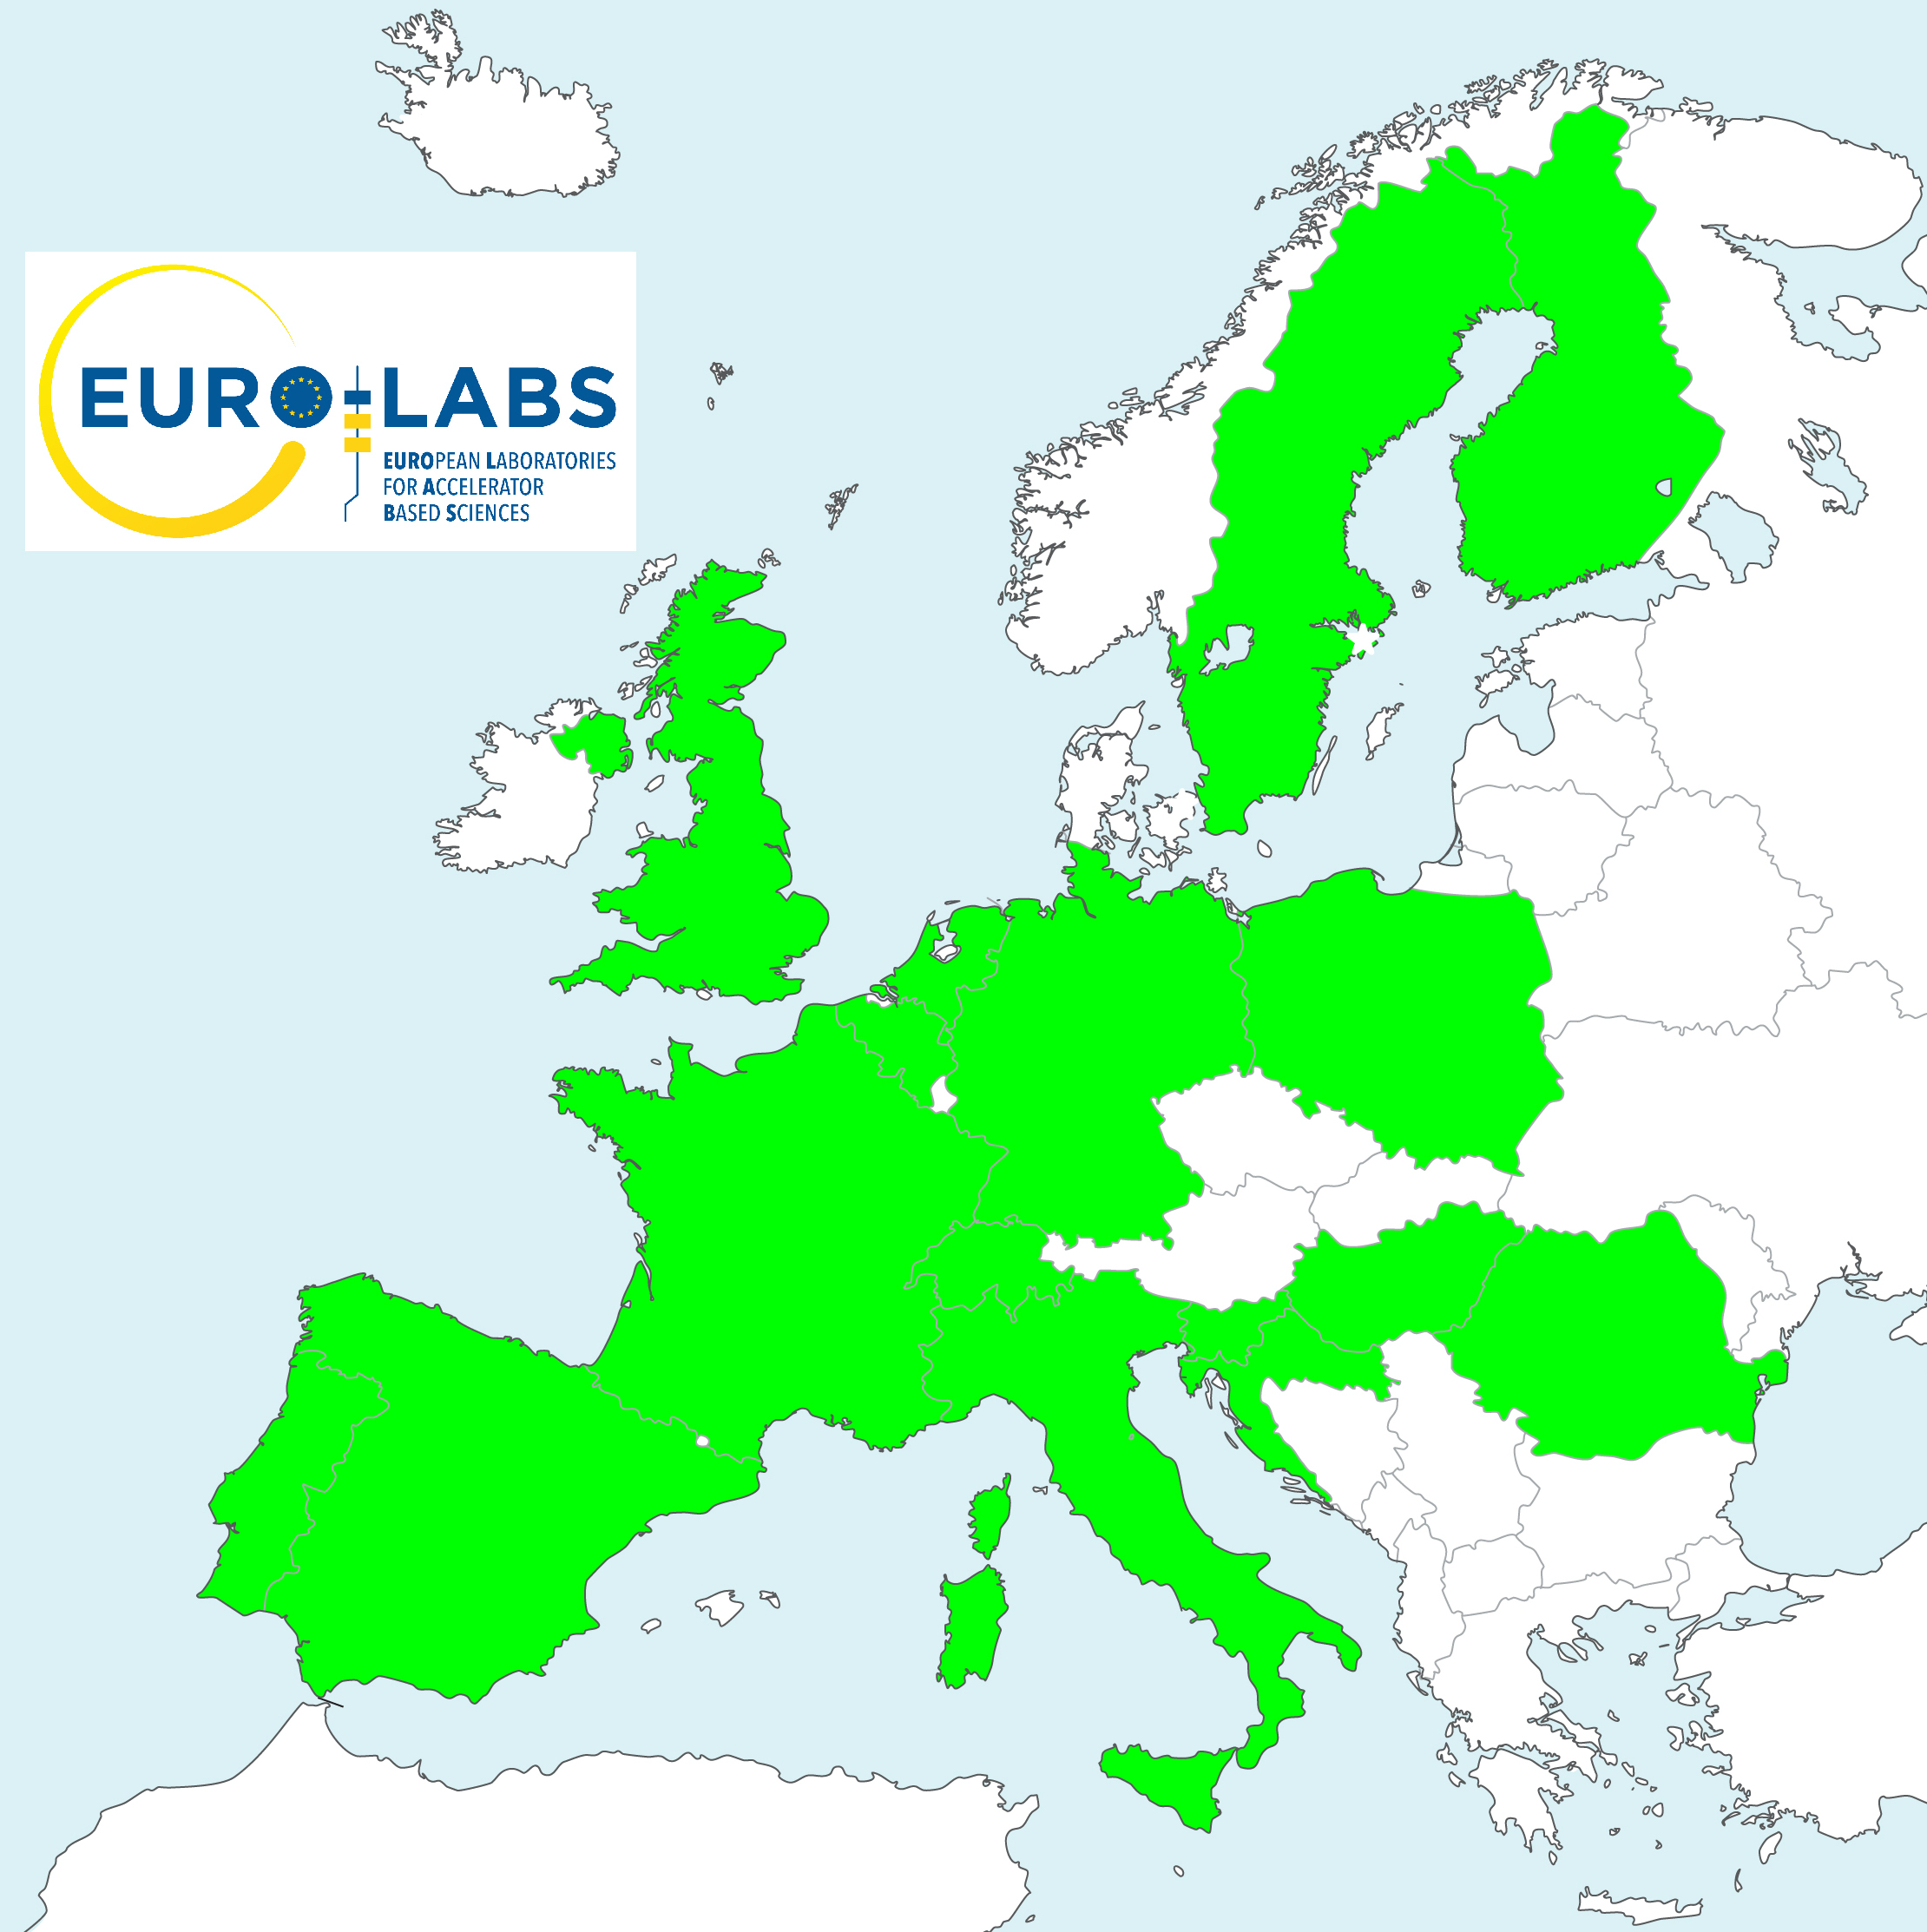 EURO-LABS map for Europe